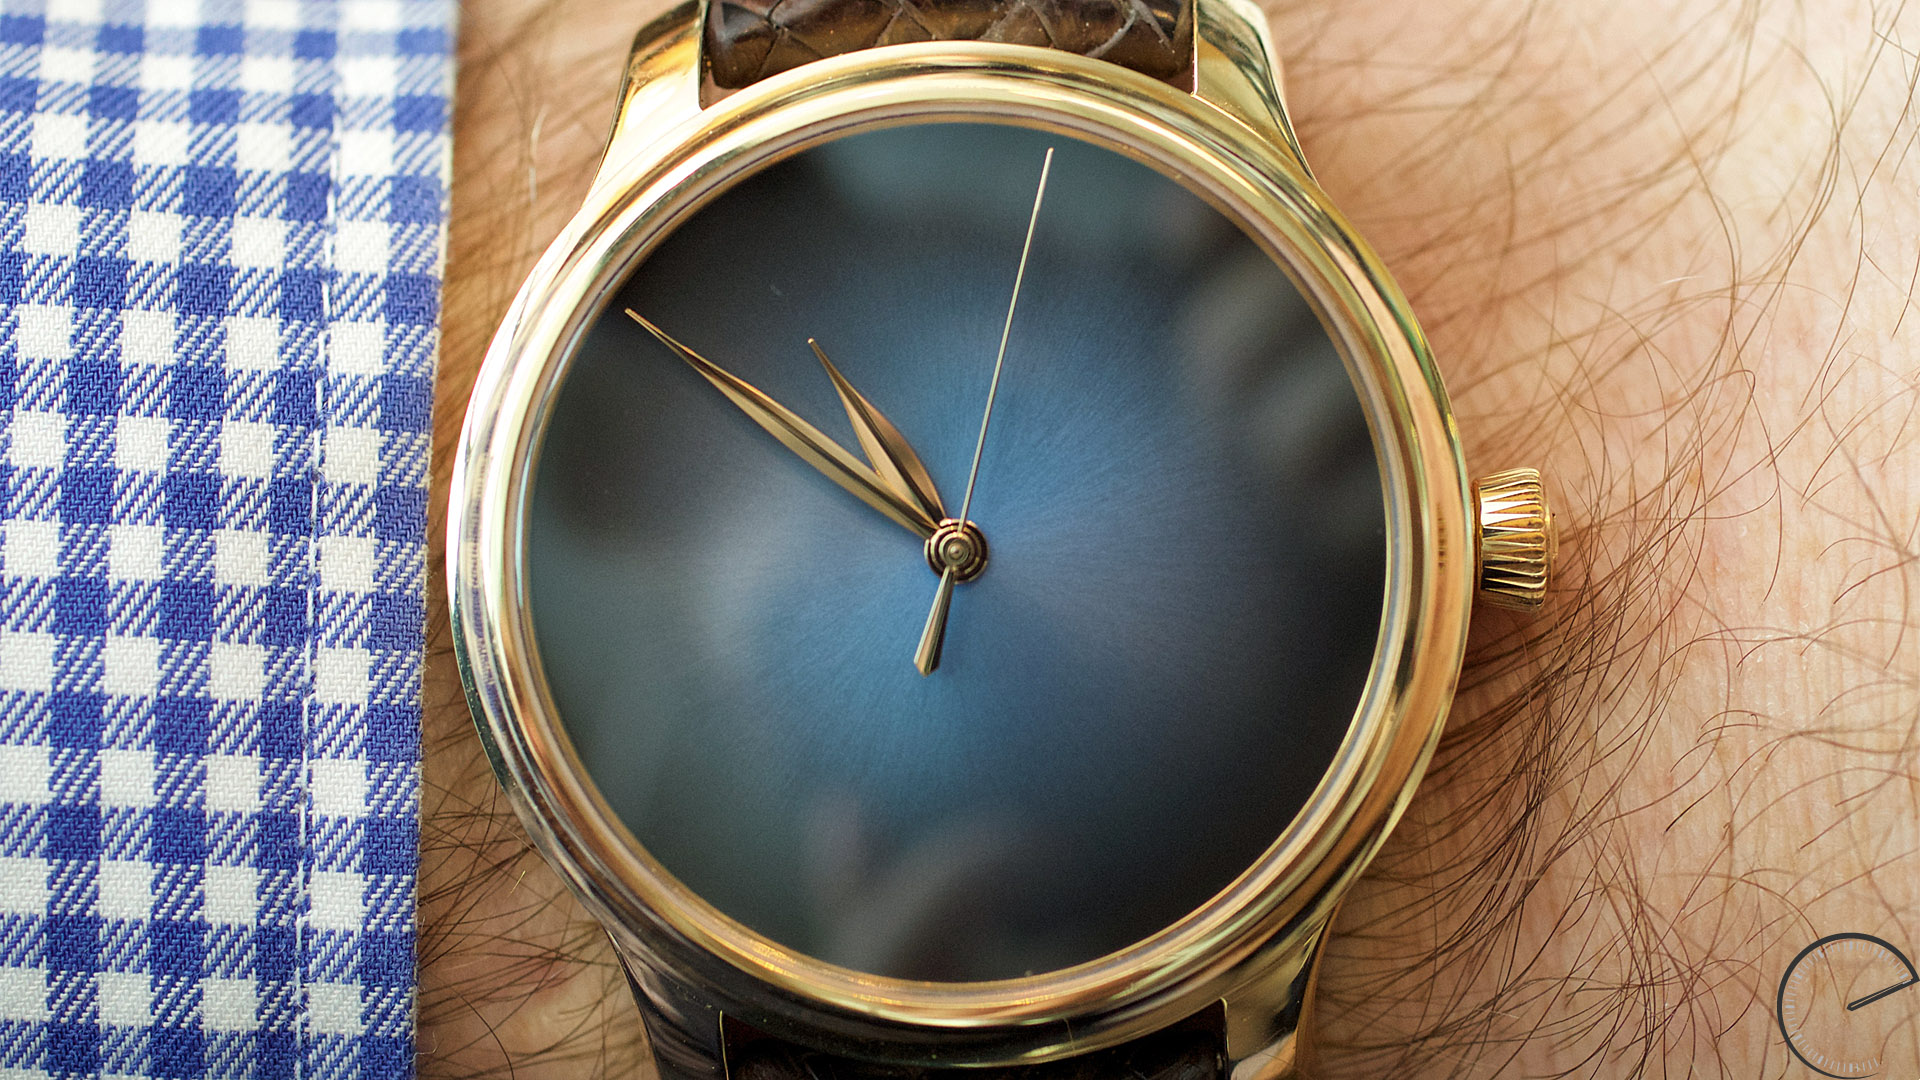 H. Moser & Cie Concept watches